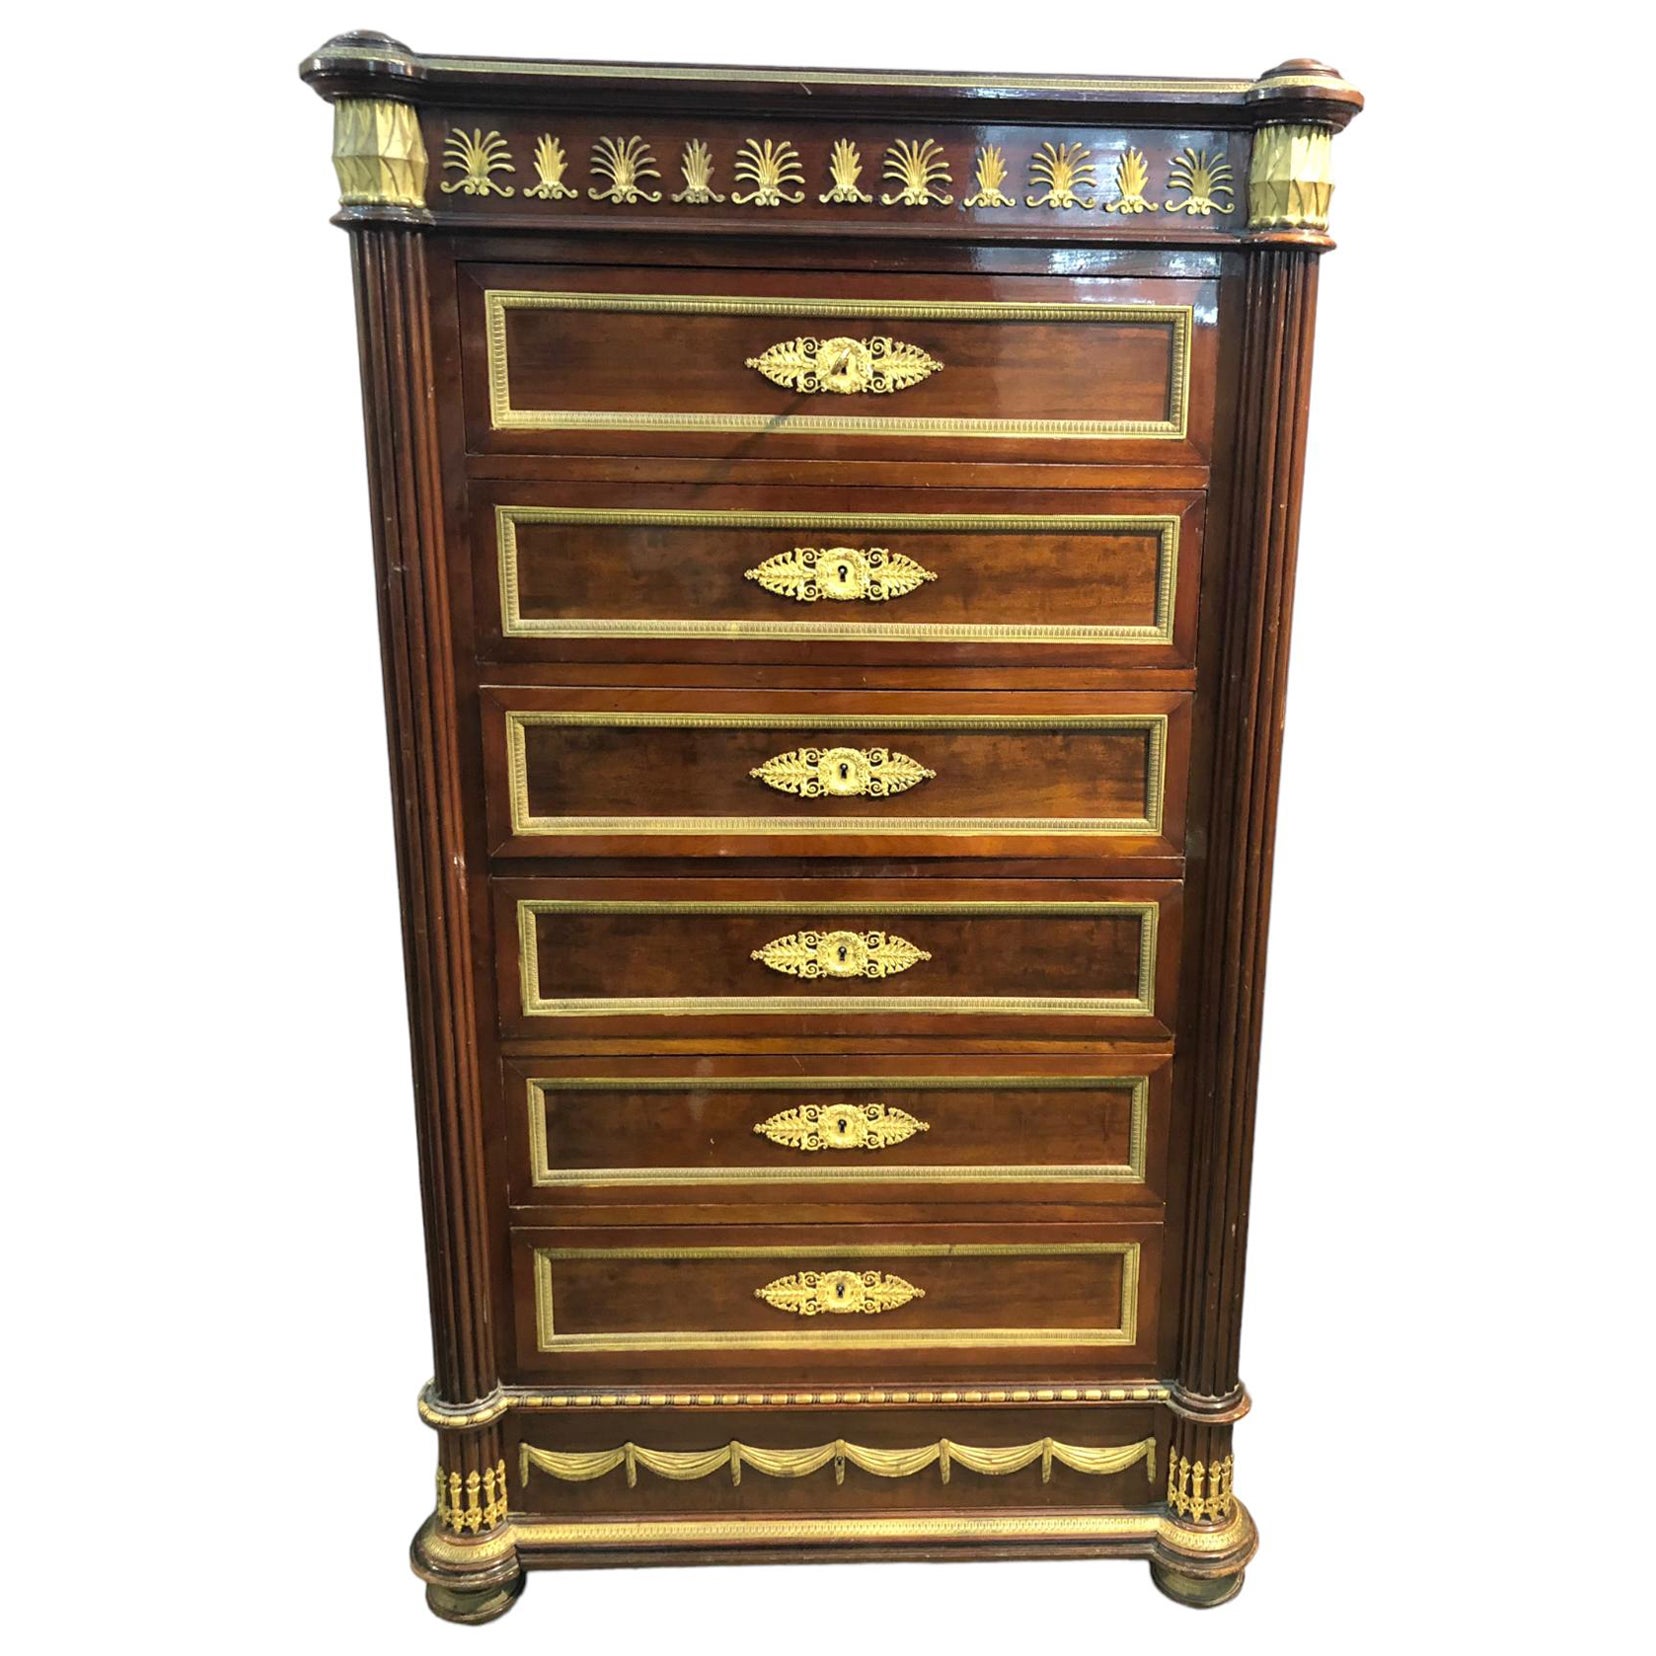 19th C. French Empire Style Ormolu Mounted Semainier Tall Chest For Sale